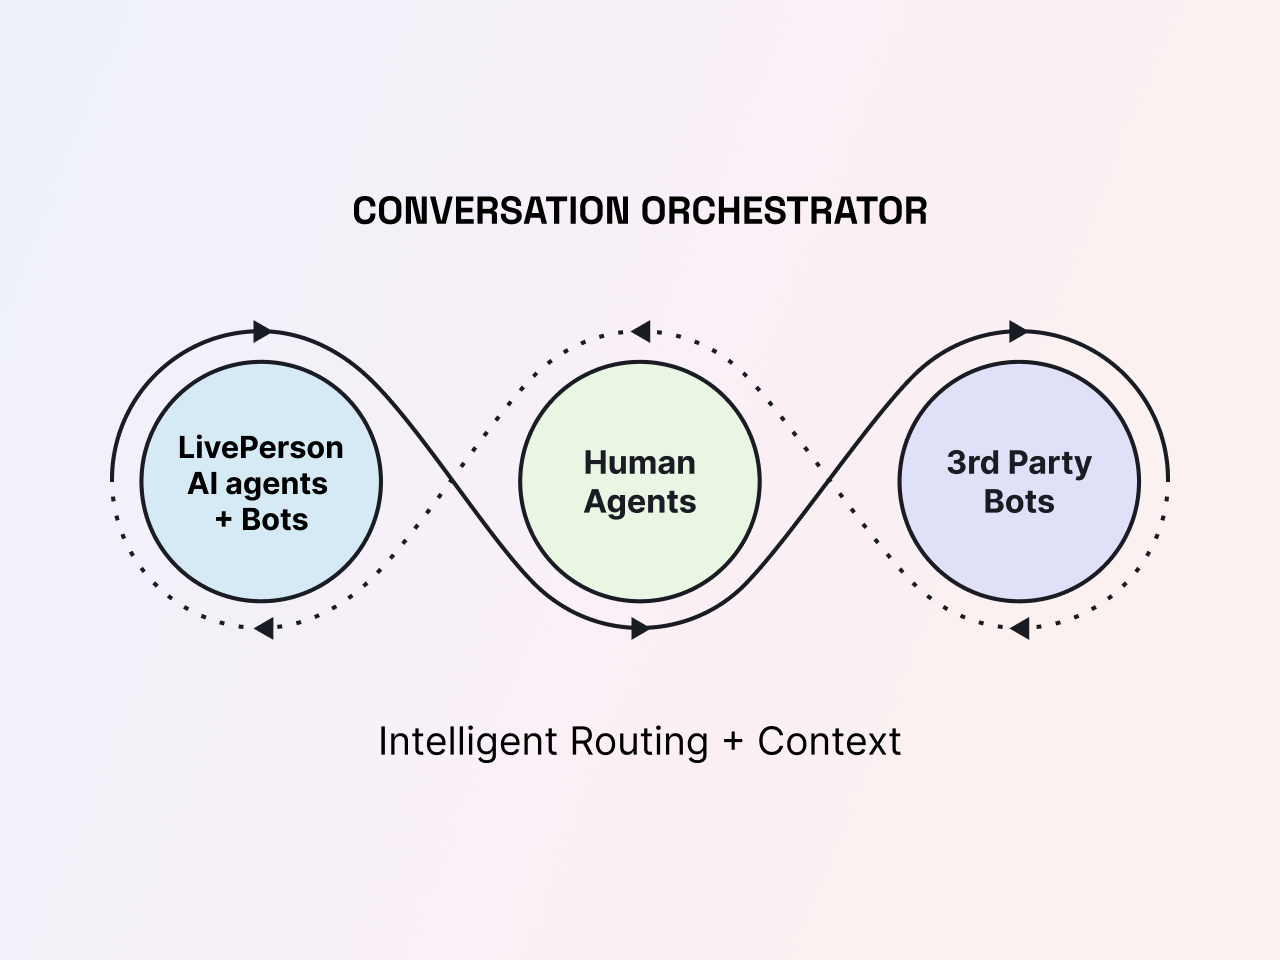 graph of how conversation orchestration works with intelligent routing system and context to connect callers to the right agent